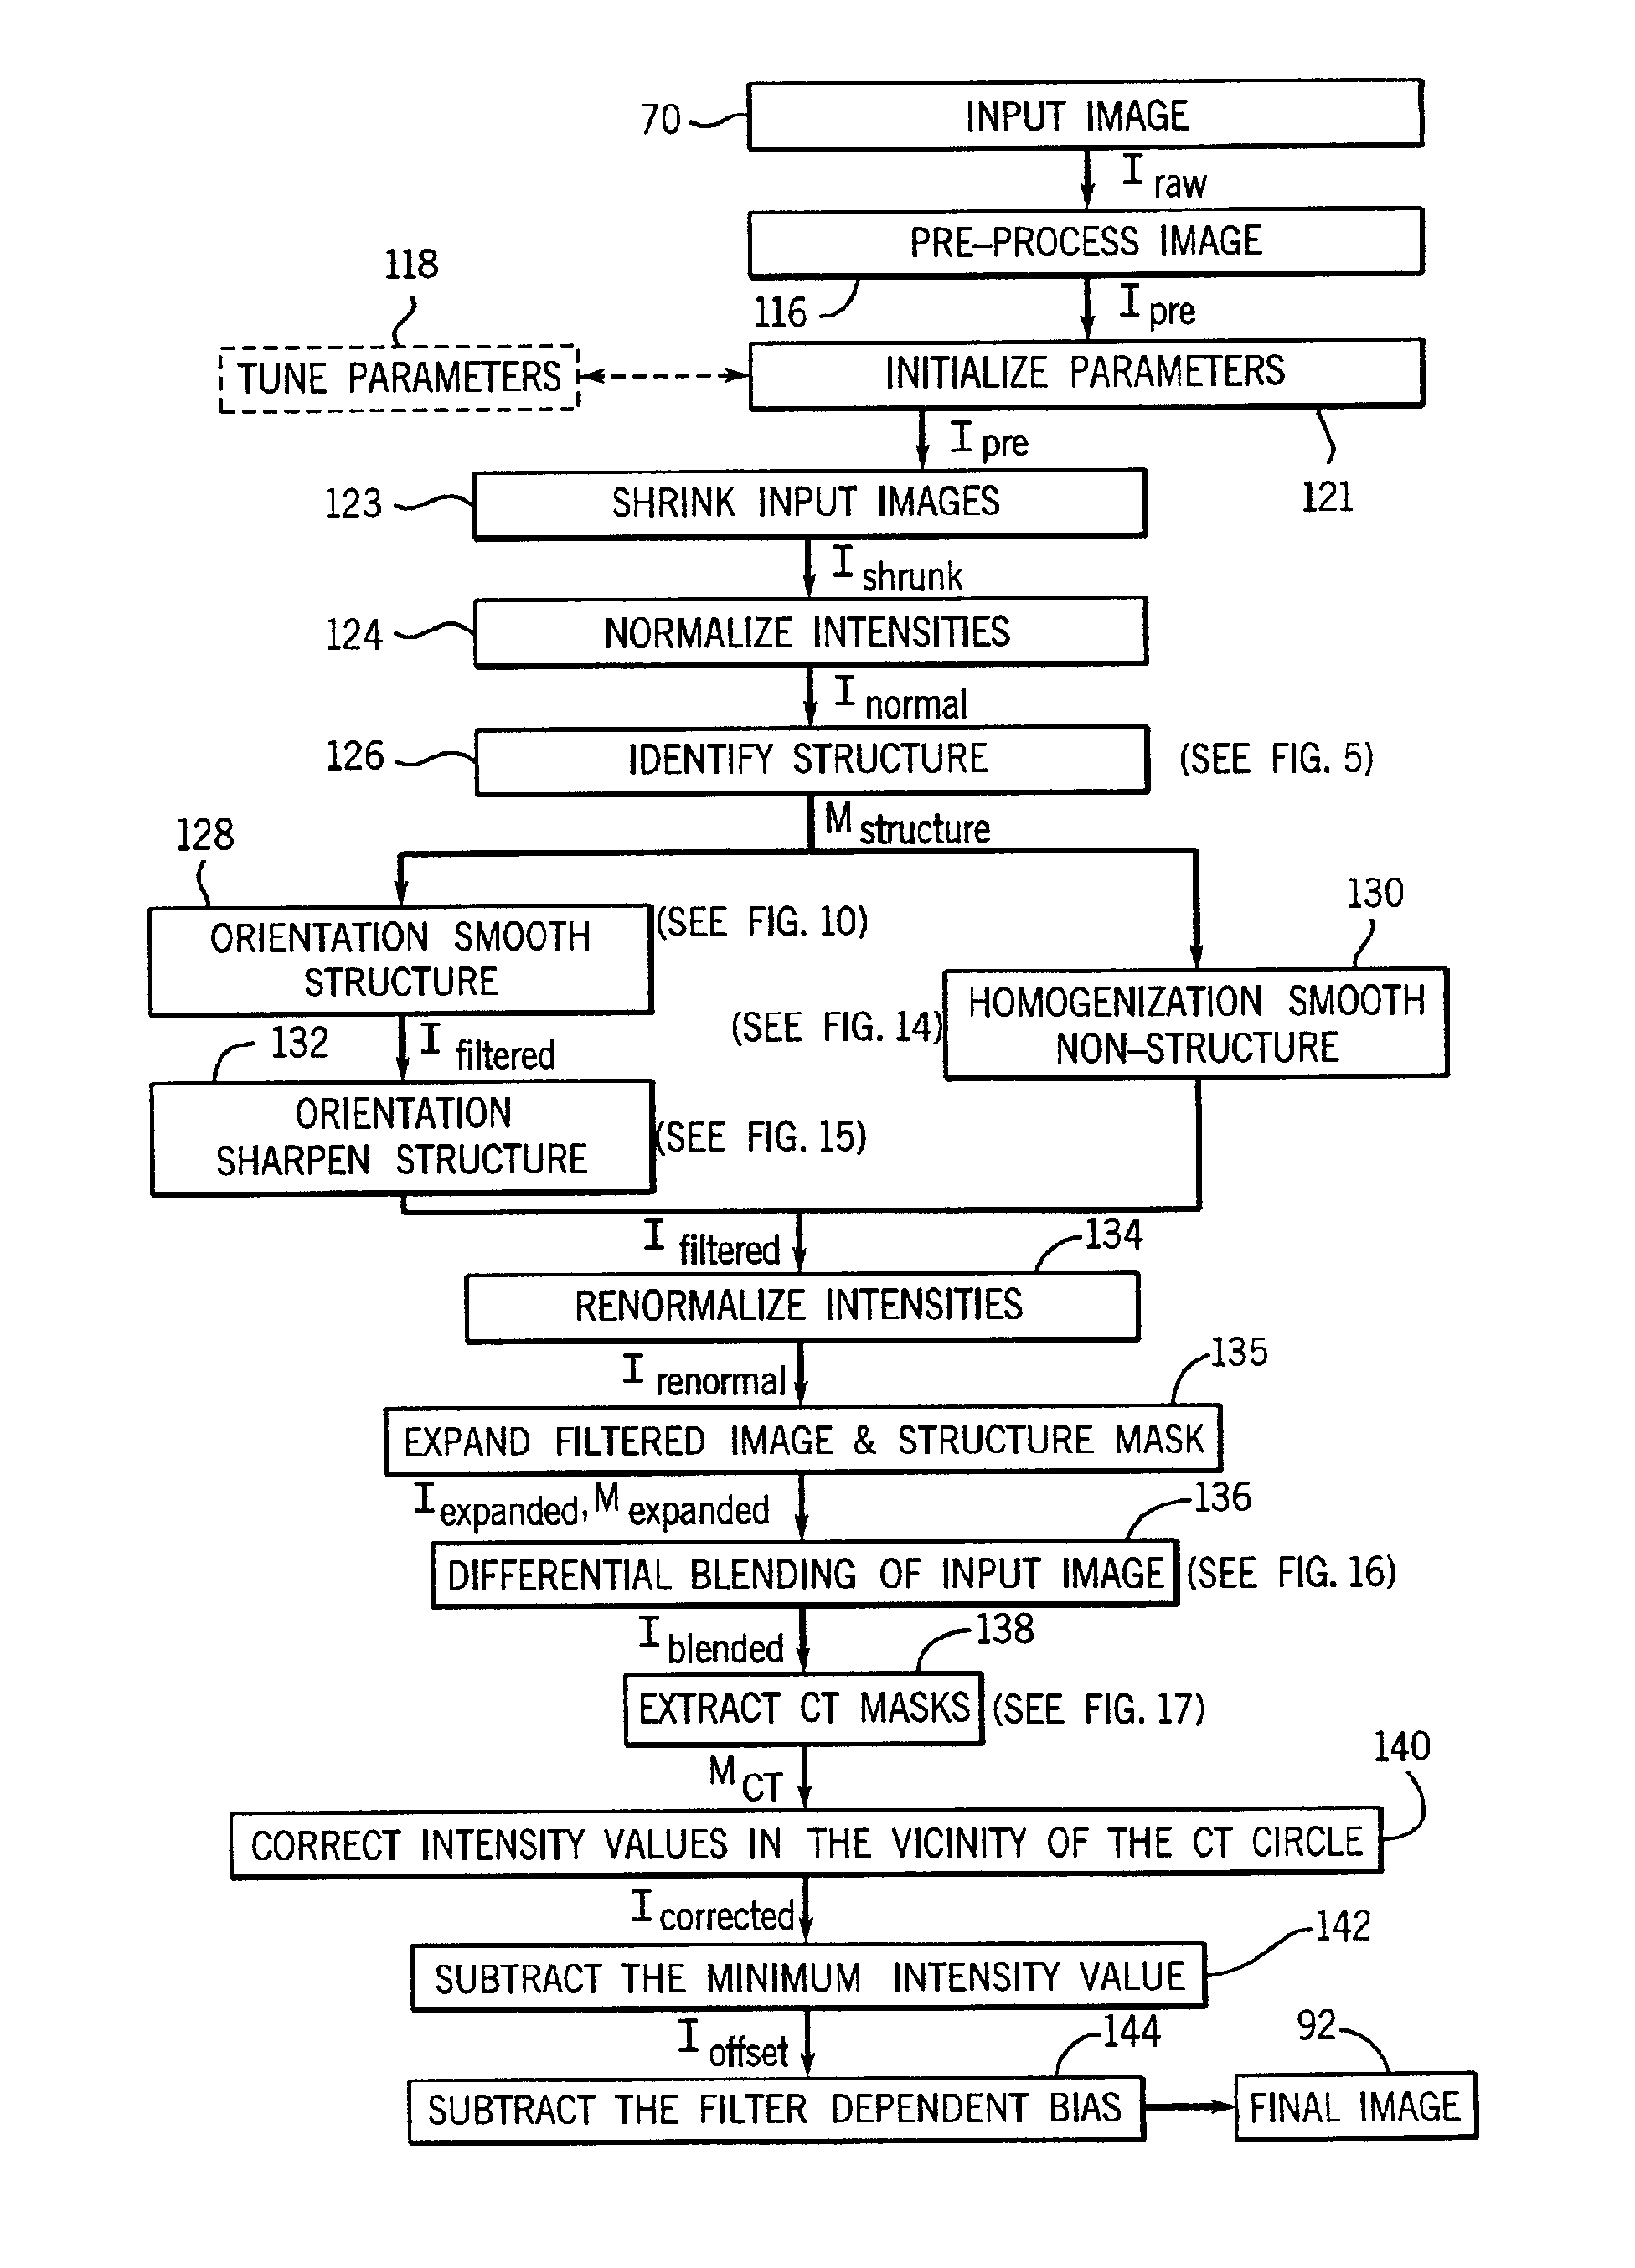 CT dose reduction filter with a computationally efficient implementation